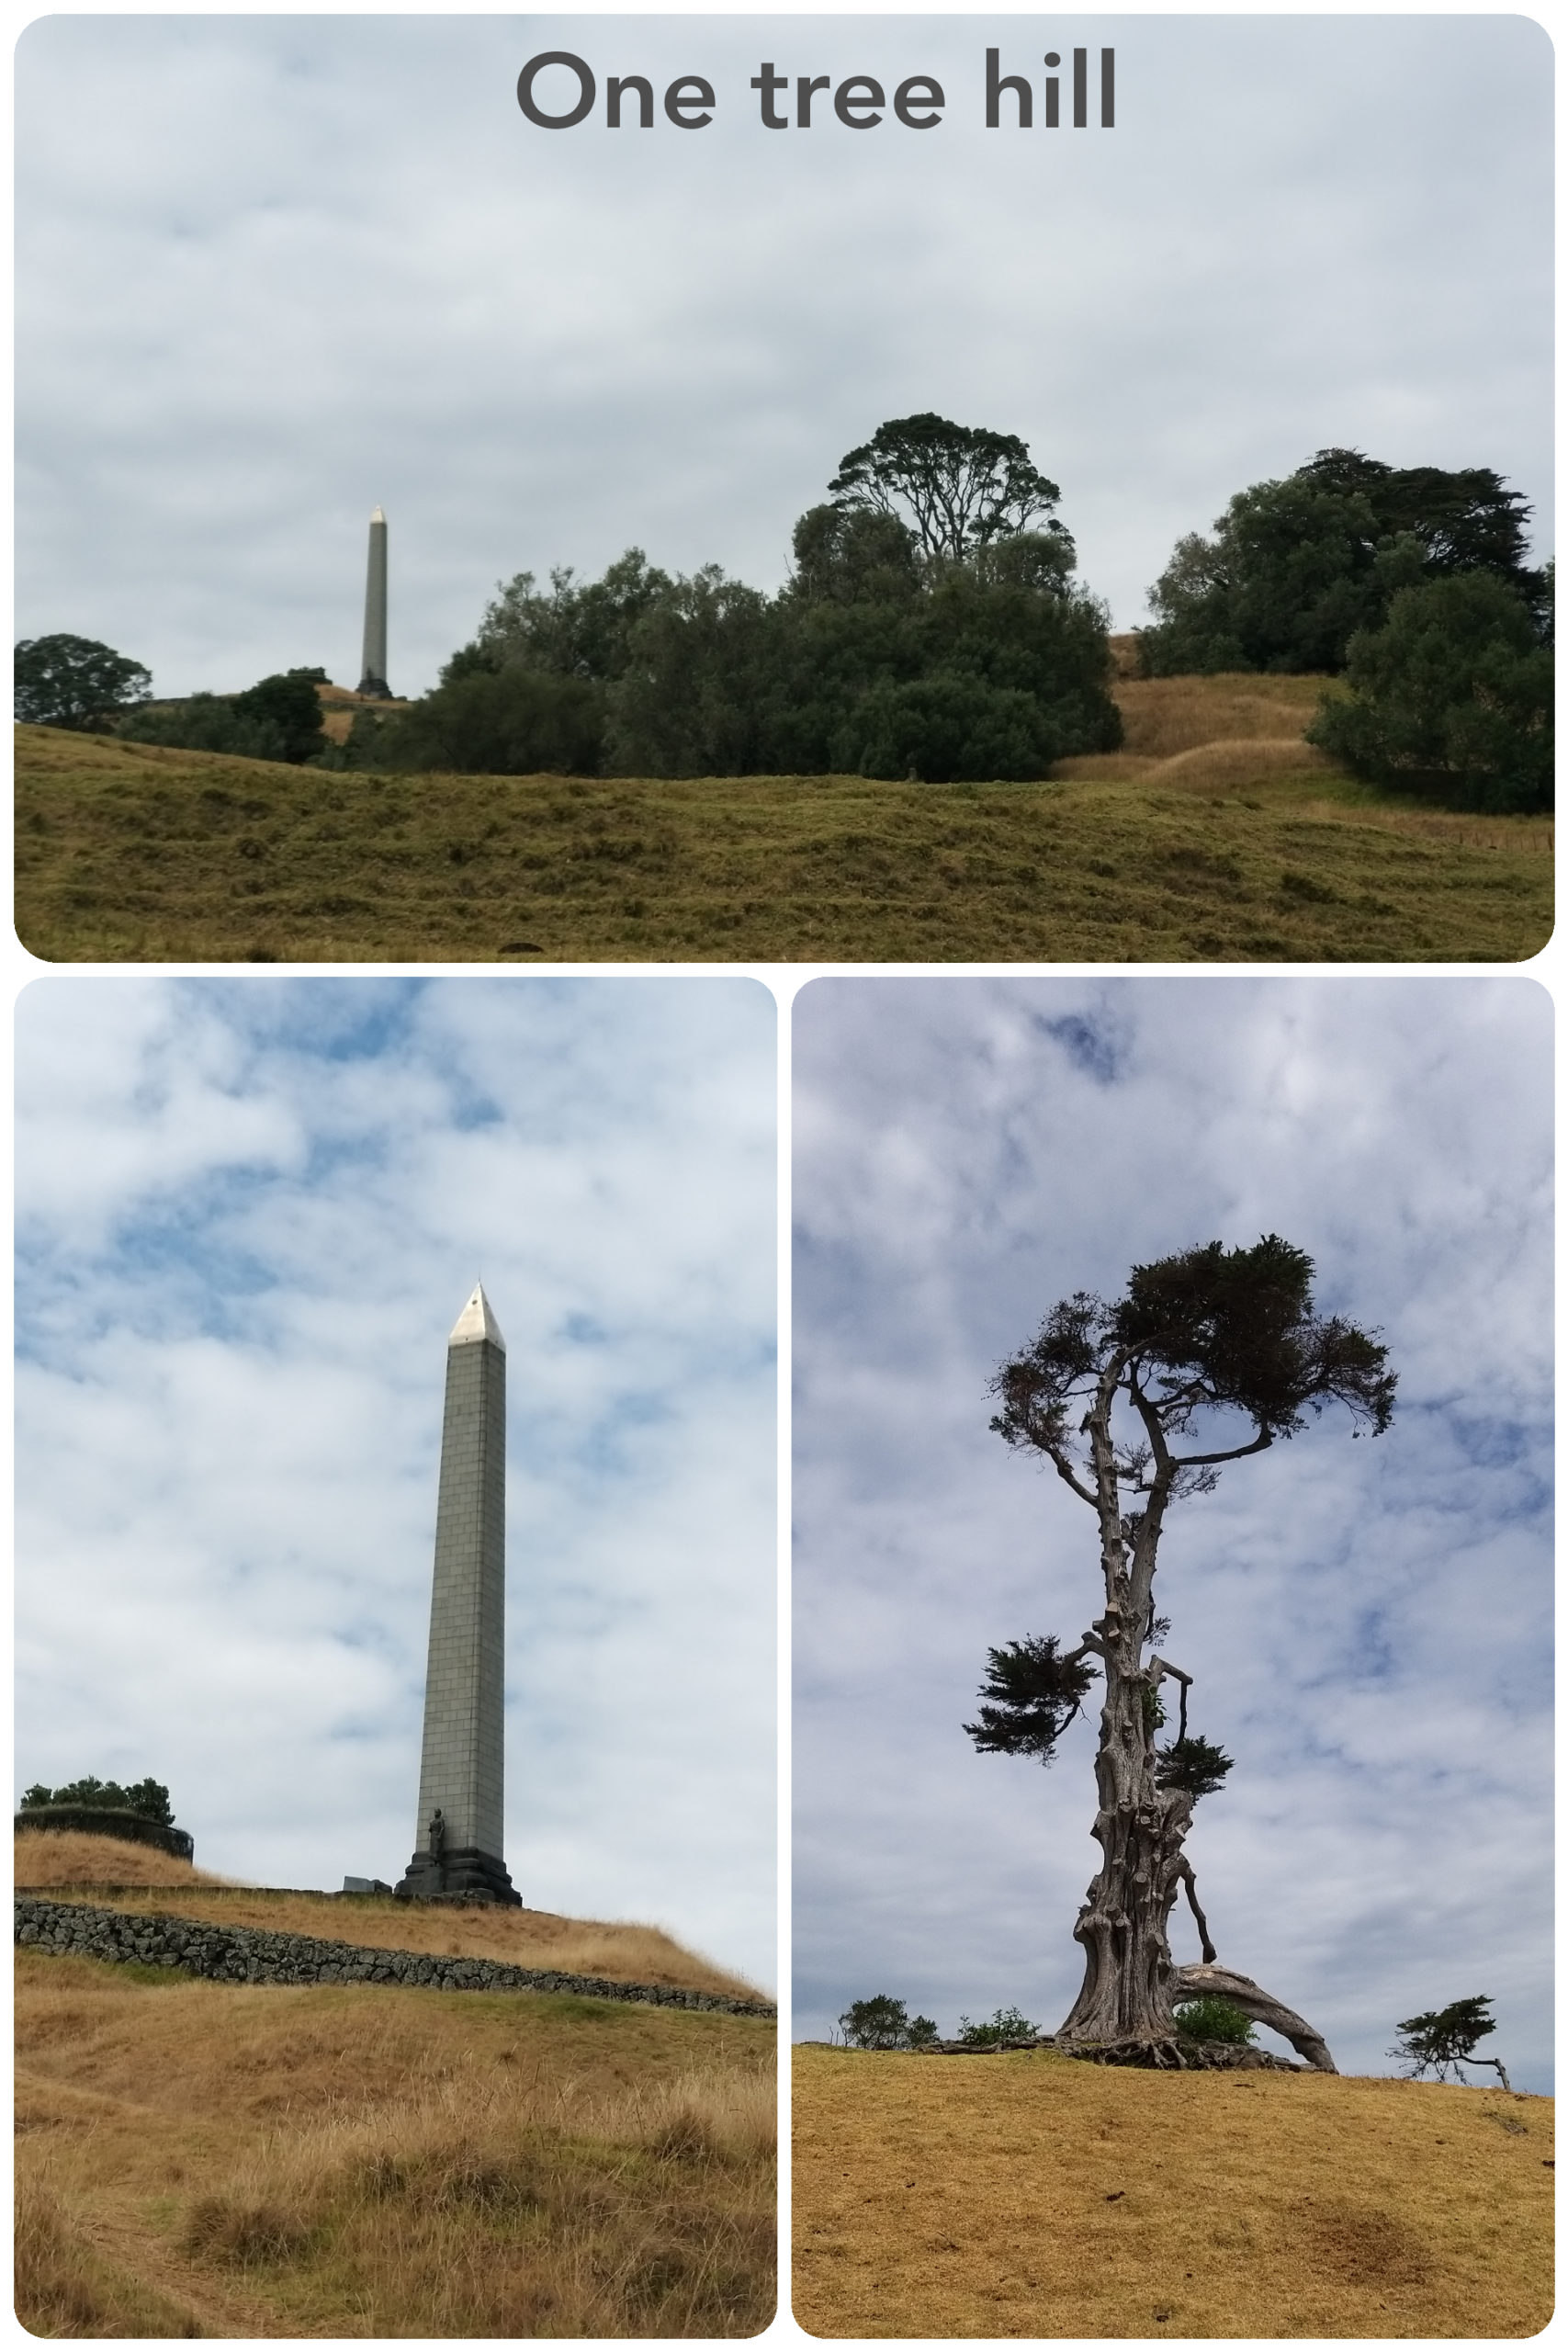 Auckland – One tree hill